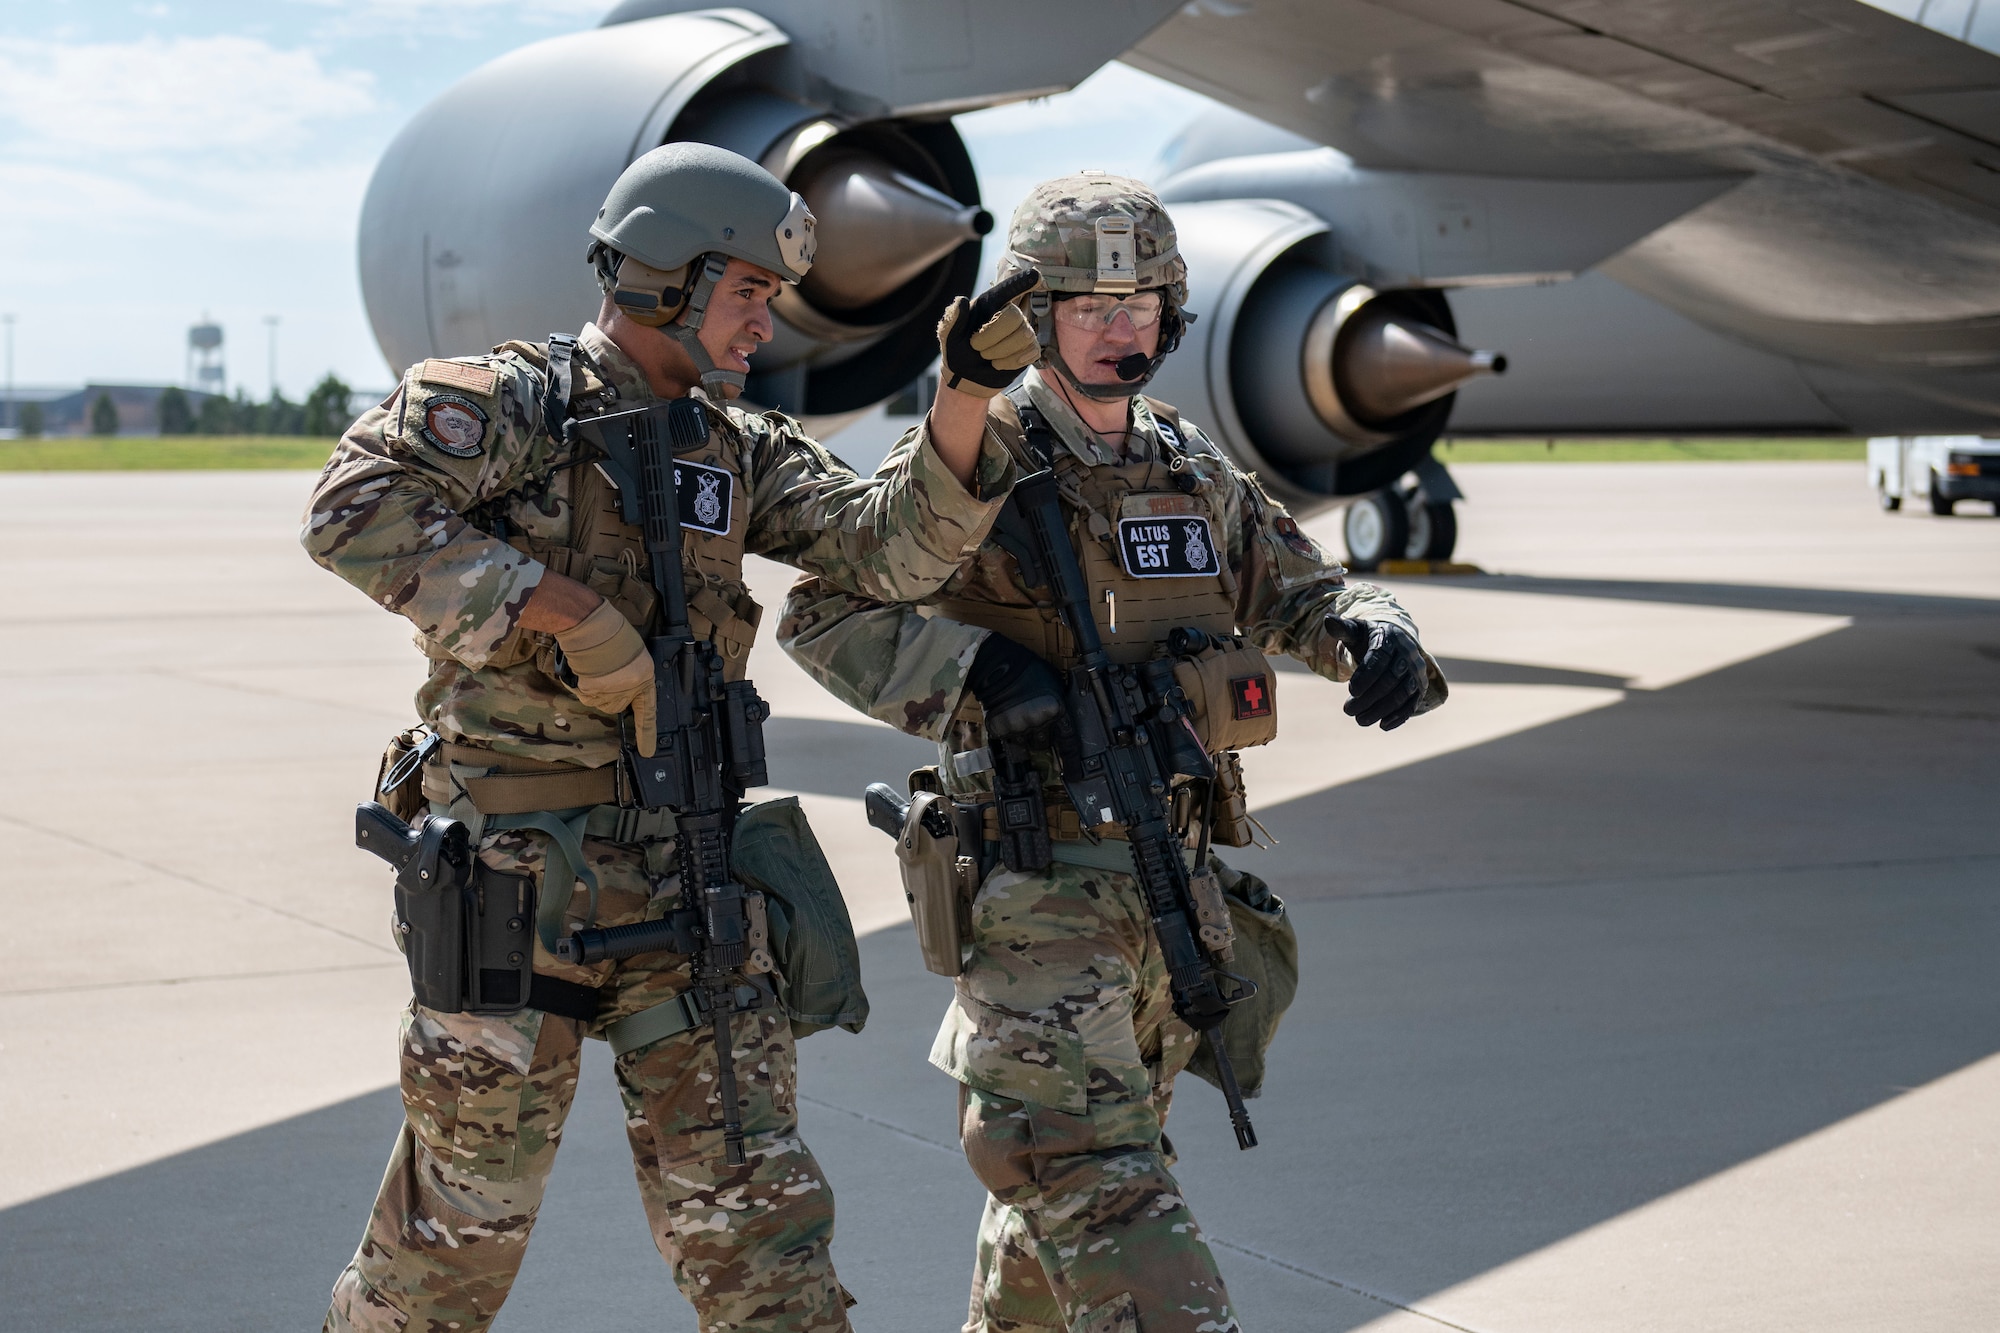 Two defenders assigned to the 97th Security Forces Squadron complete an inspection around a KC-135 Stratotanker after an air defense exercise, October 9, 2019, at Altus Air Force Base, Okla.